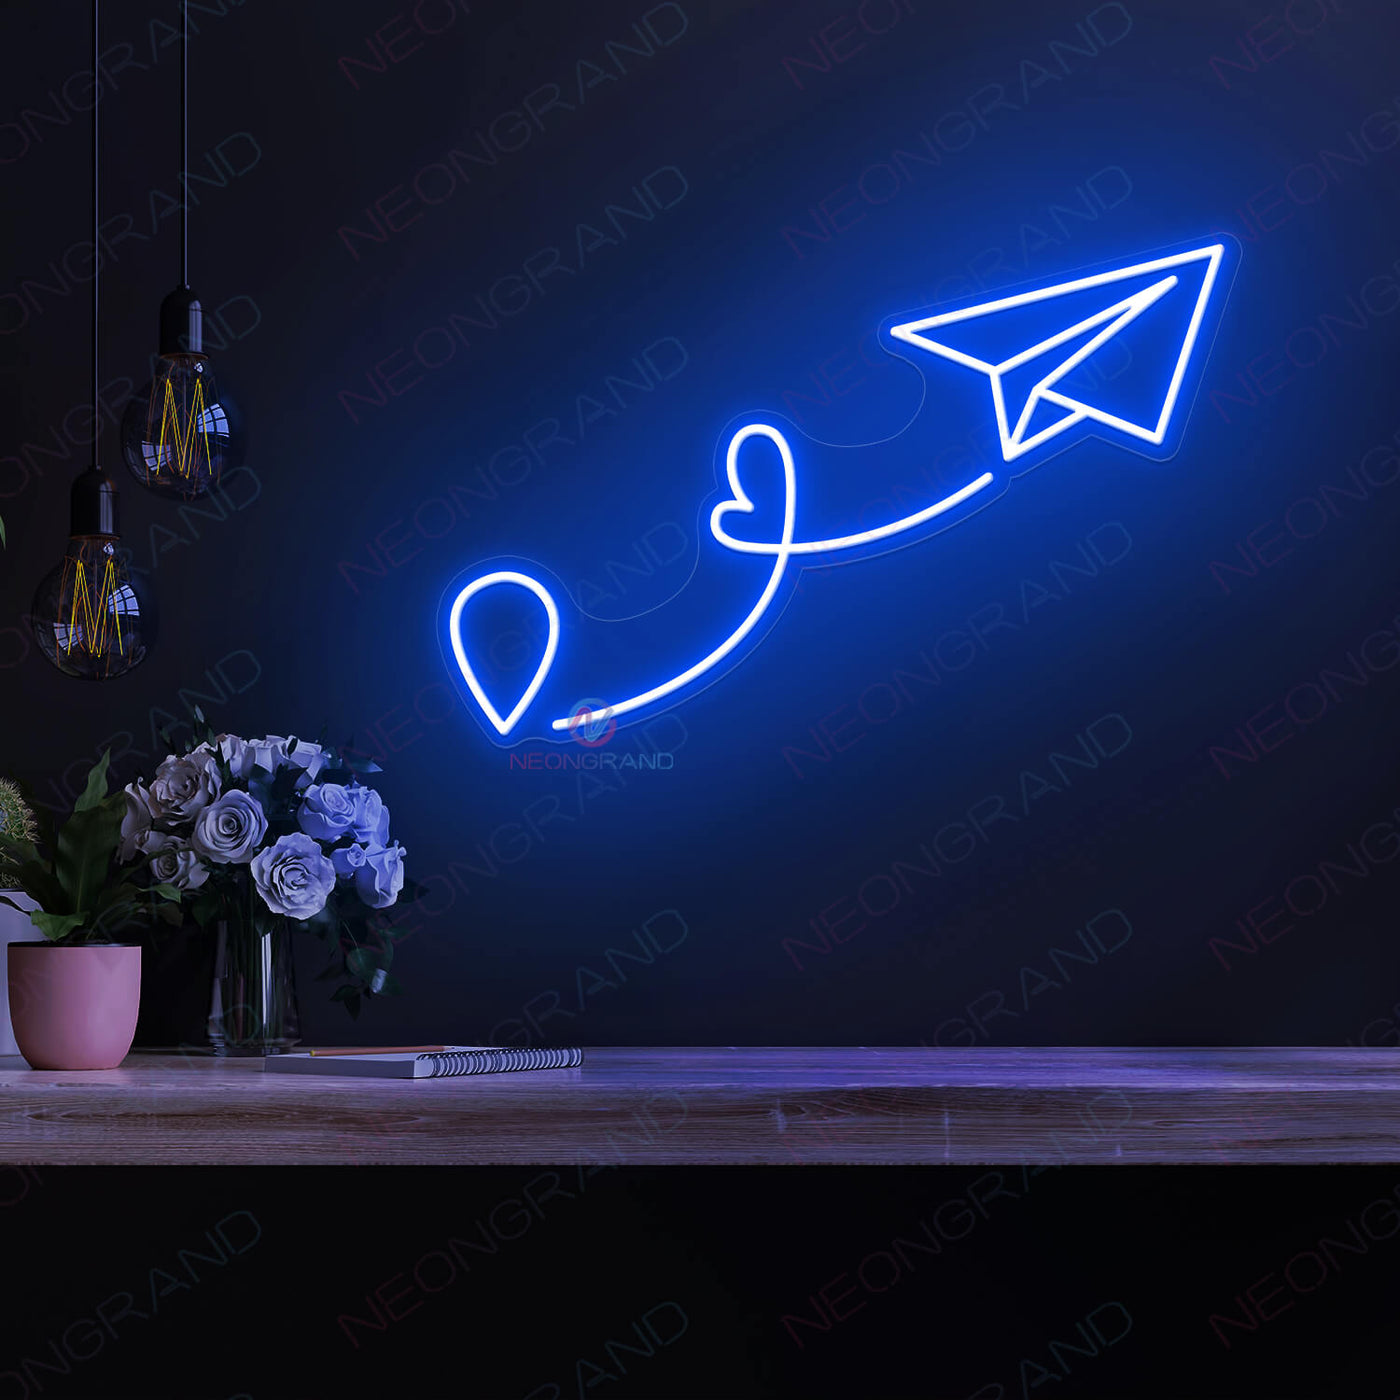 Airplane Neon Sign Aviation Neon Signs Led Light blue